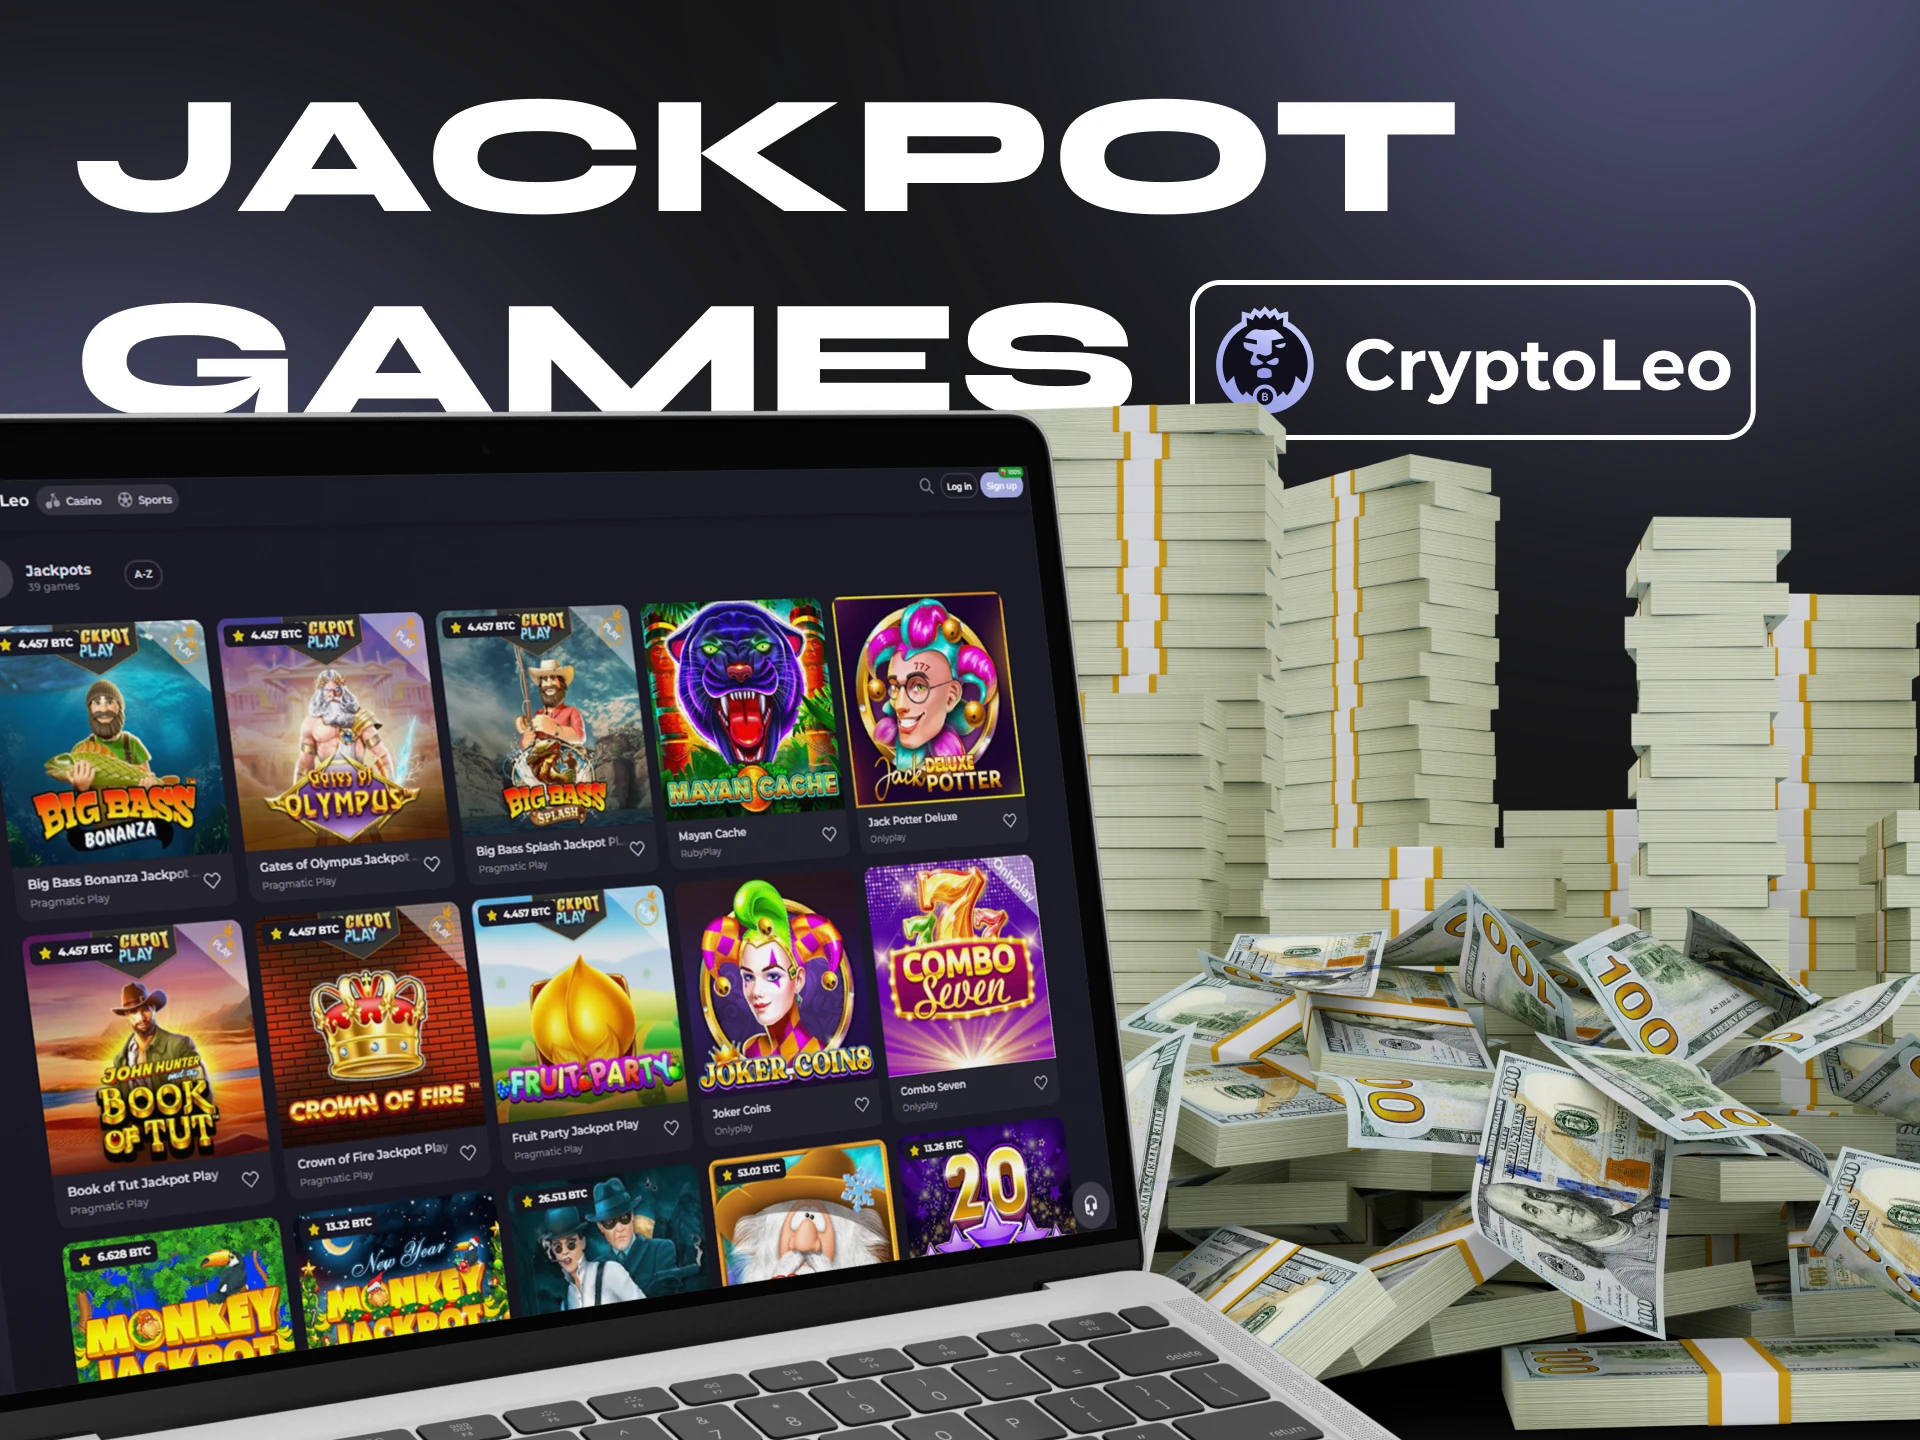 At Cryptoleo, you can find a large section of jackpot games.